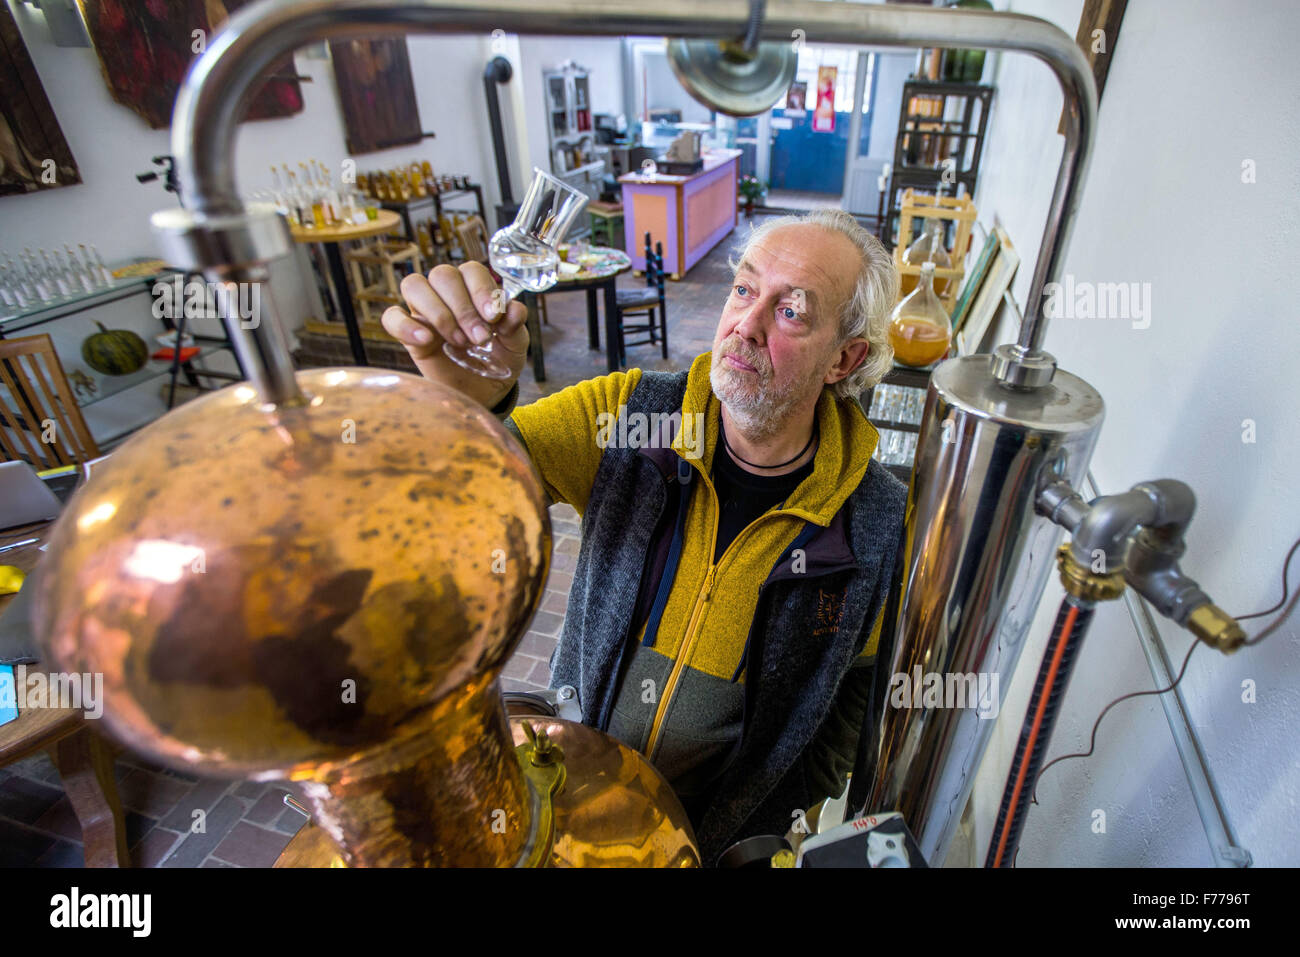 Kluetz, Germany. 24th Nov, 2015. Johann Volk checks the clarity of a seabuckthorn spirit at the still in the new Kluetzer Edelbrand Destille distillery in Kluetz, Germany, 24 November 2015. A bottling plant and art gallery have been operating at the former dairy for years. Since the last few days, 8 brandies and 6 liqueurs are also being produced here. In early 2016, the small business plans to expand with a second, larger distillery. PHOTO: JENS BUETTNER/LMV/dpa/Alamy Live News Stock Photo